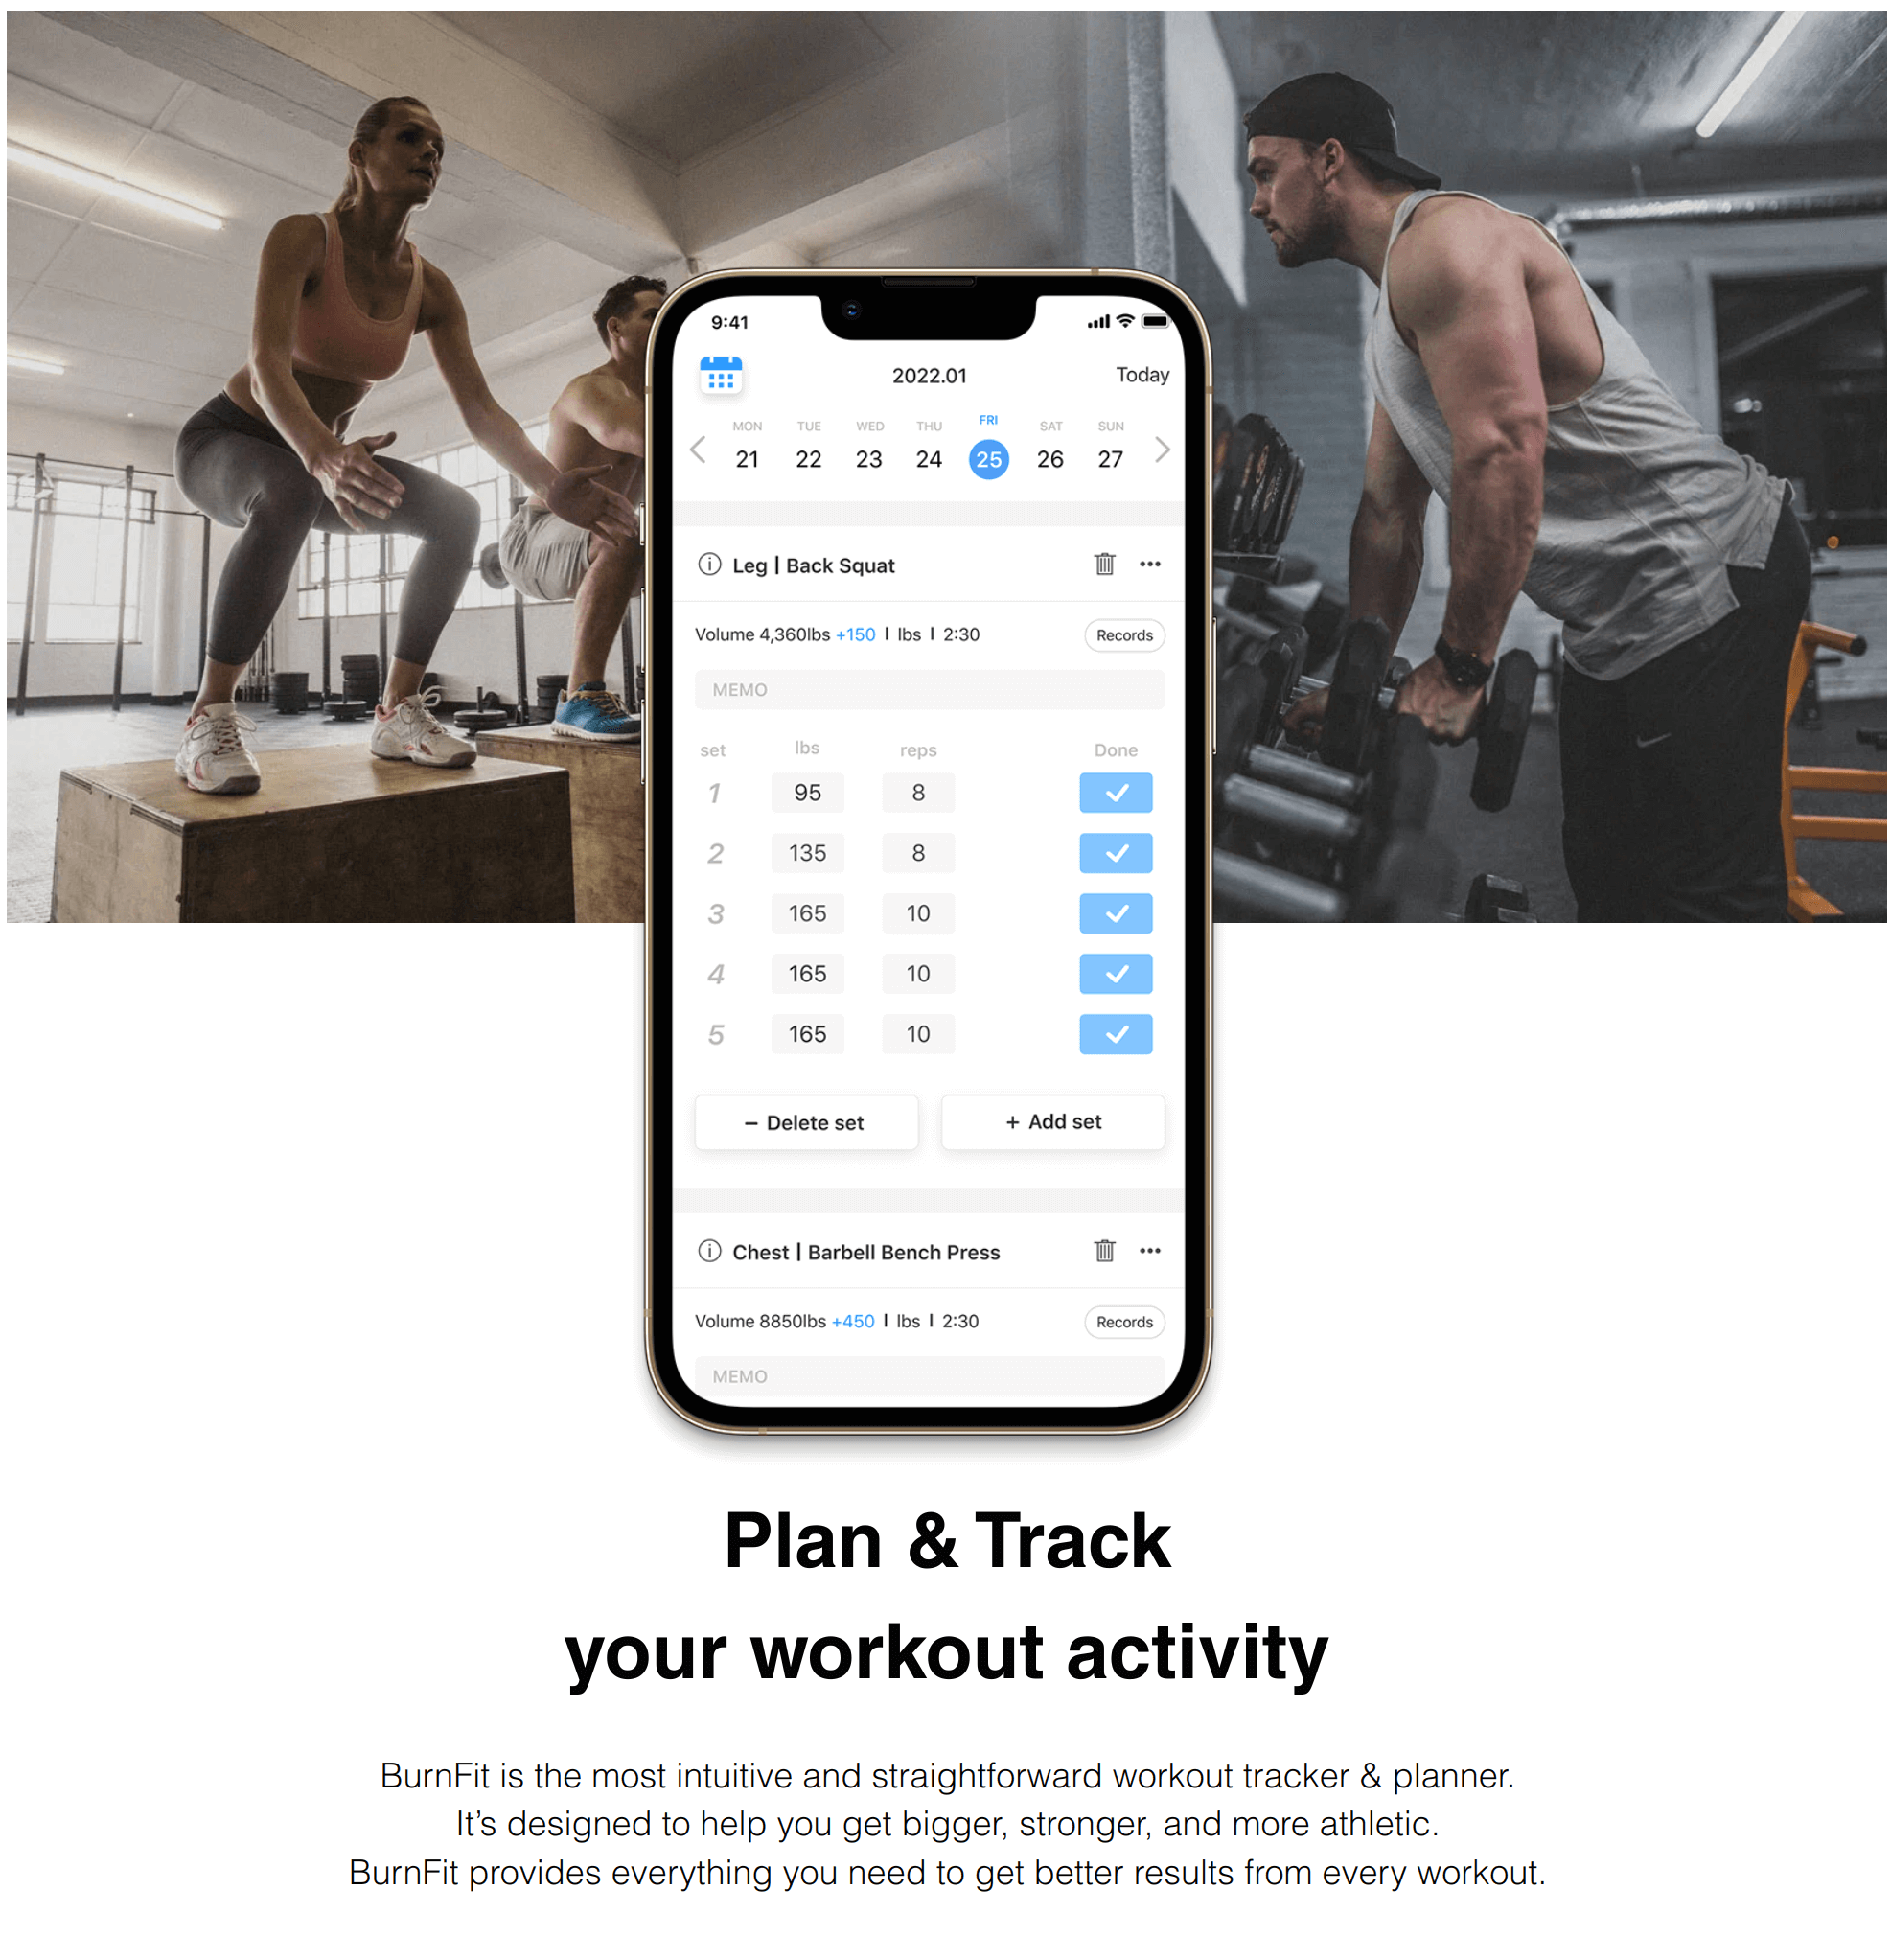 Using A Workout Accountability App To